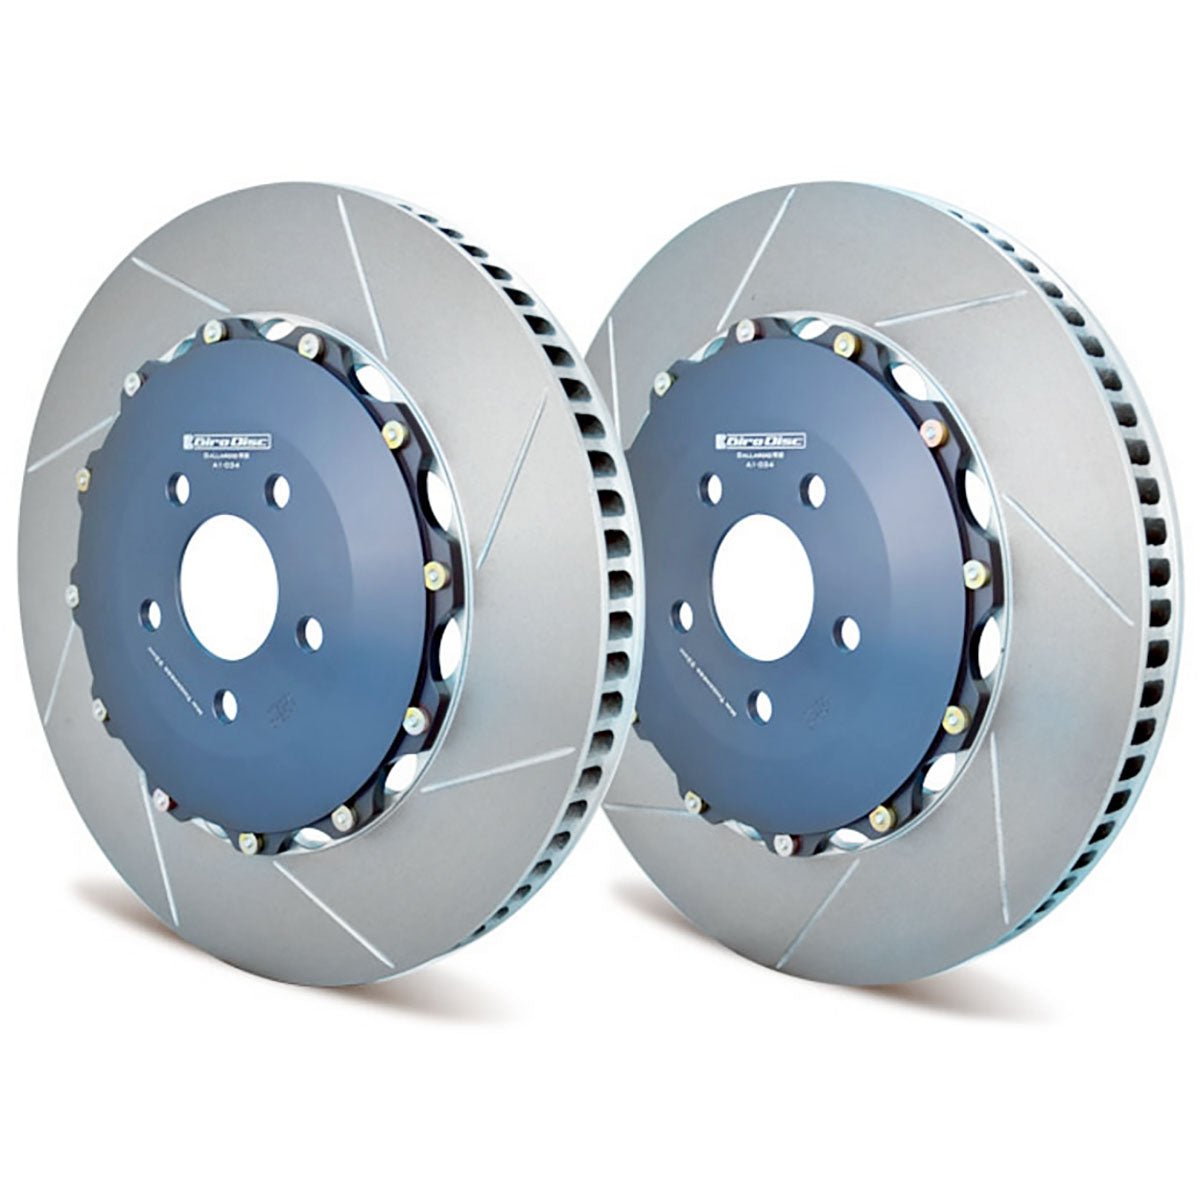 A1-034 Girodisc 2pc Front Brake Rotors (380mm) - Competition Motorsport